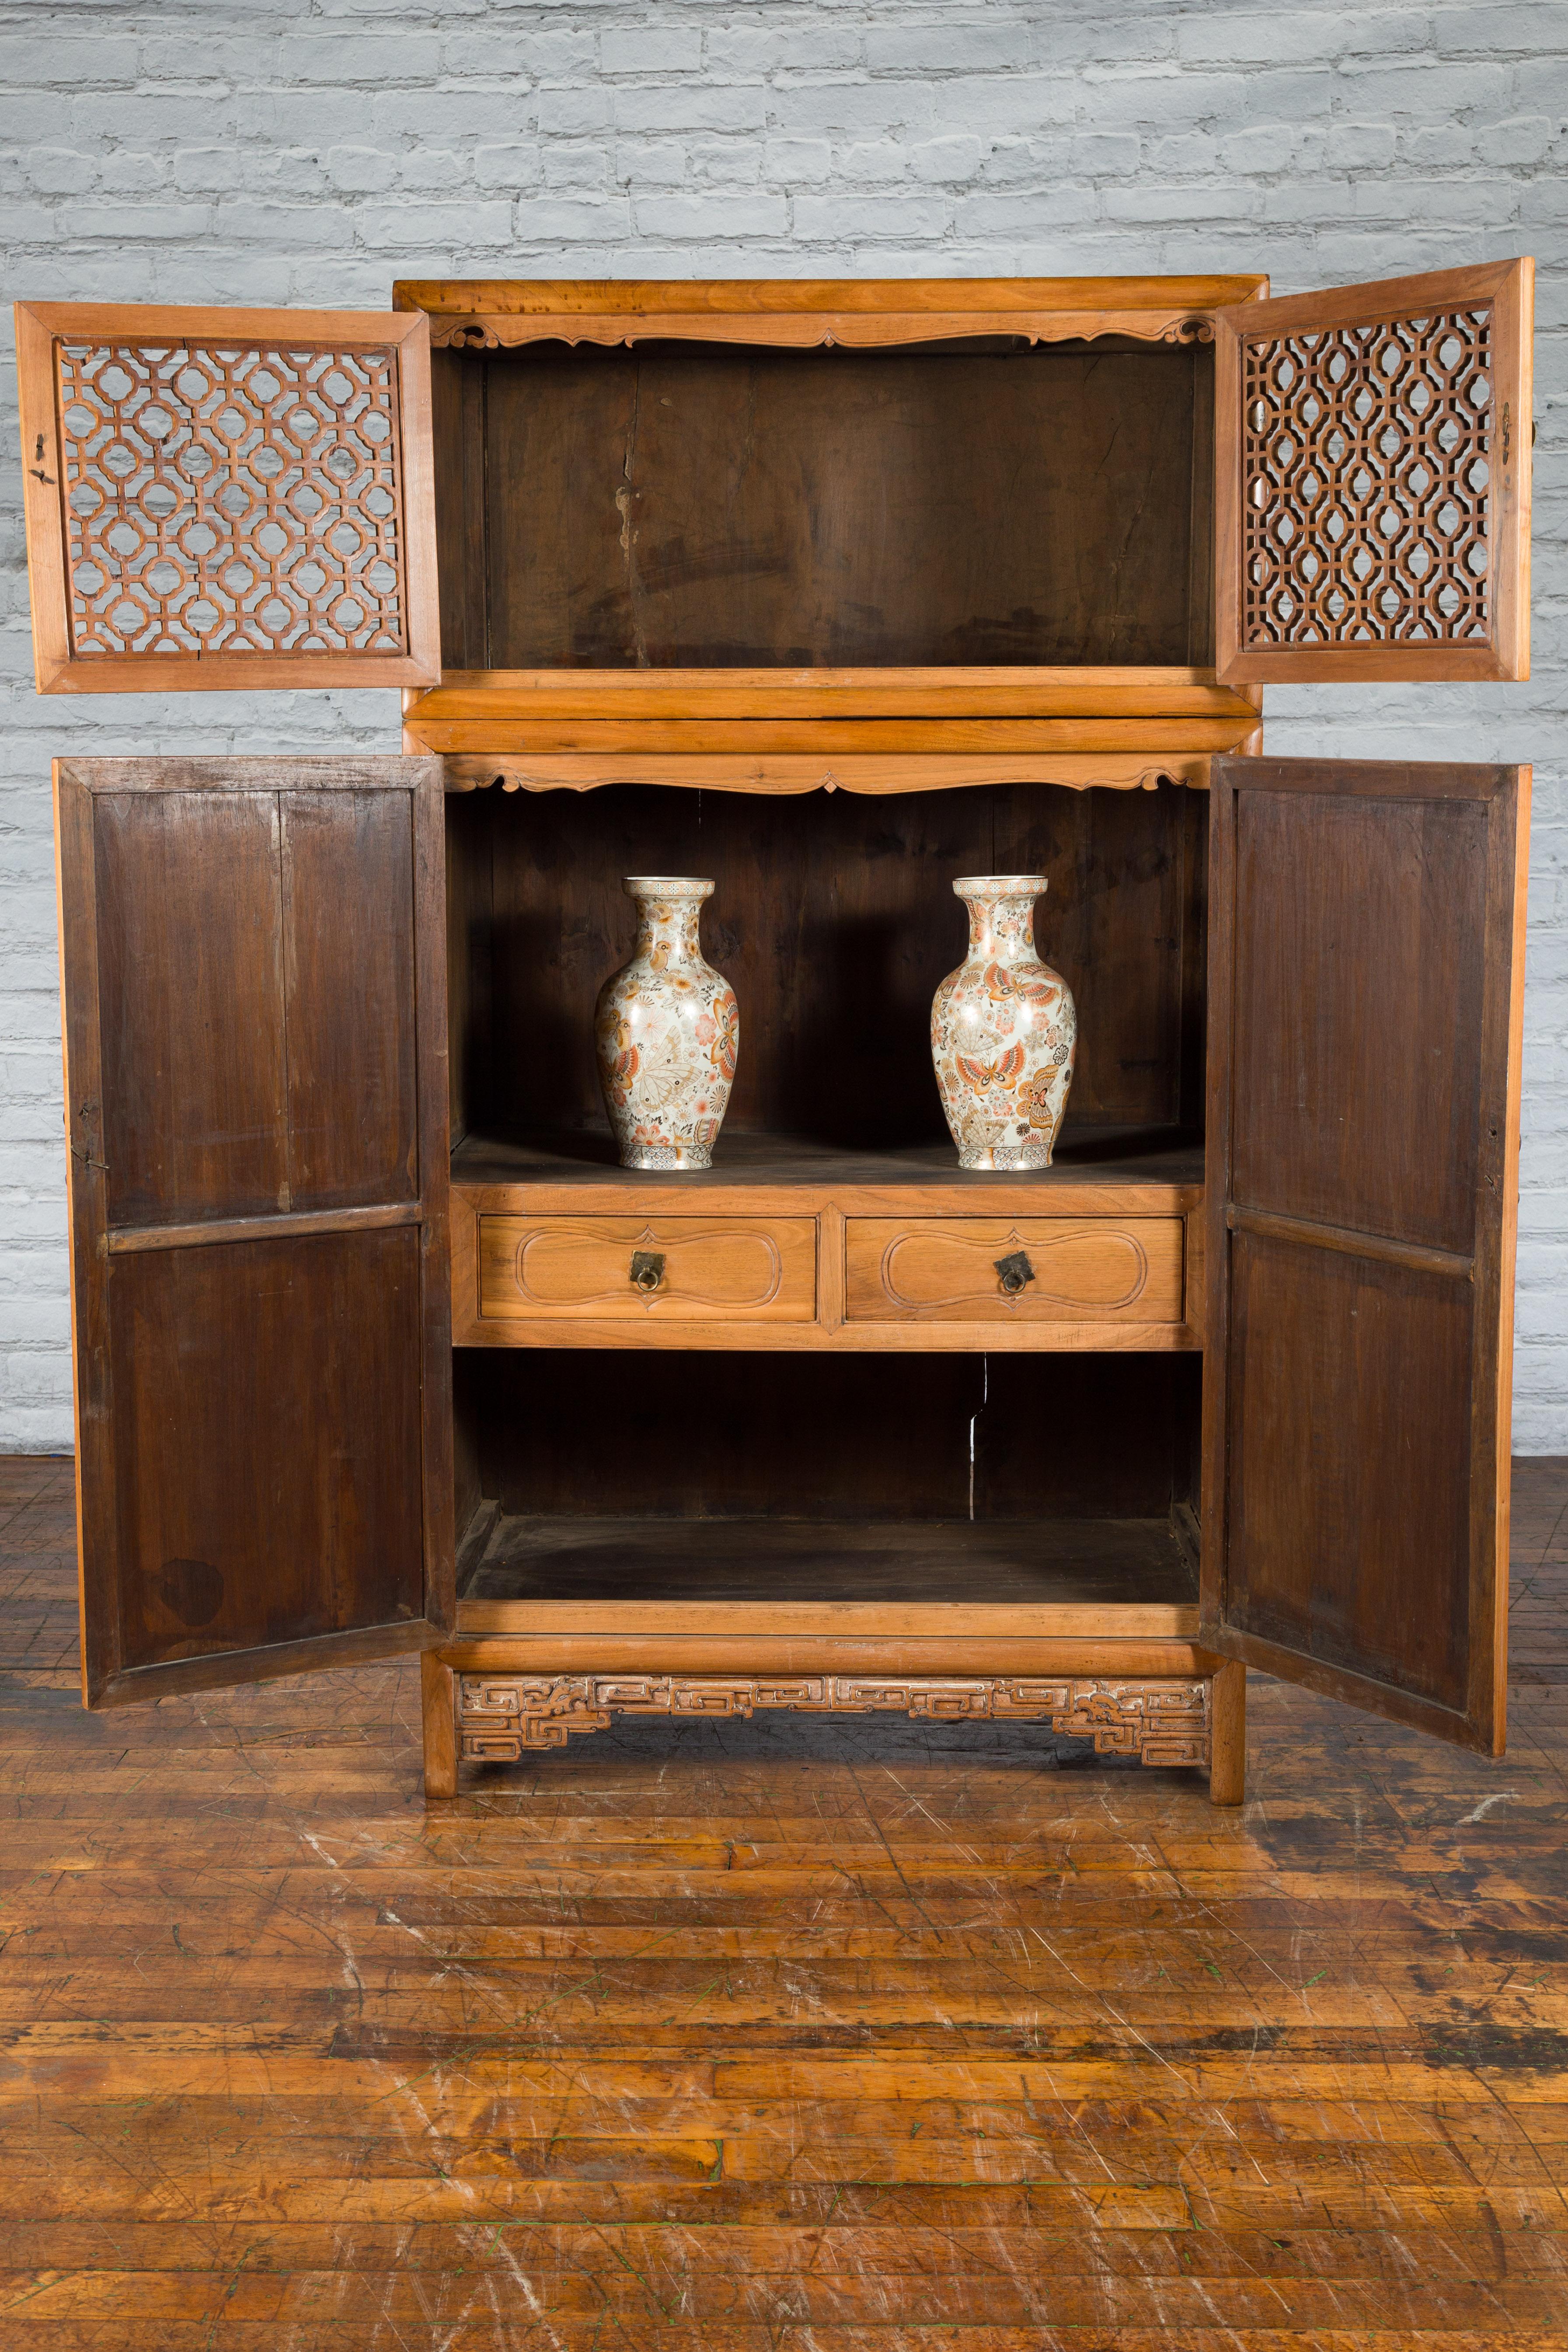 Chinese Qing Dynasty 19th Century Kitchen Cabinet with Quatrefoil Style Fretwork In Good Condition For Sale In Yonkers, NY